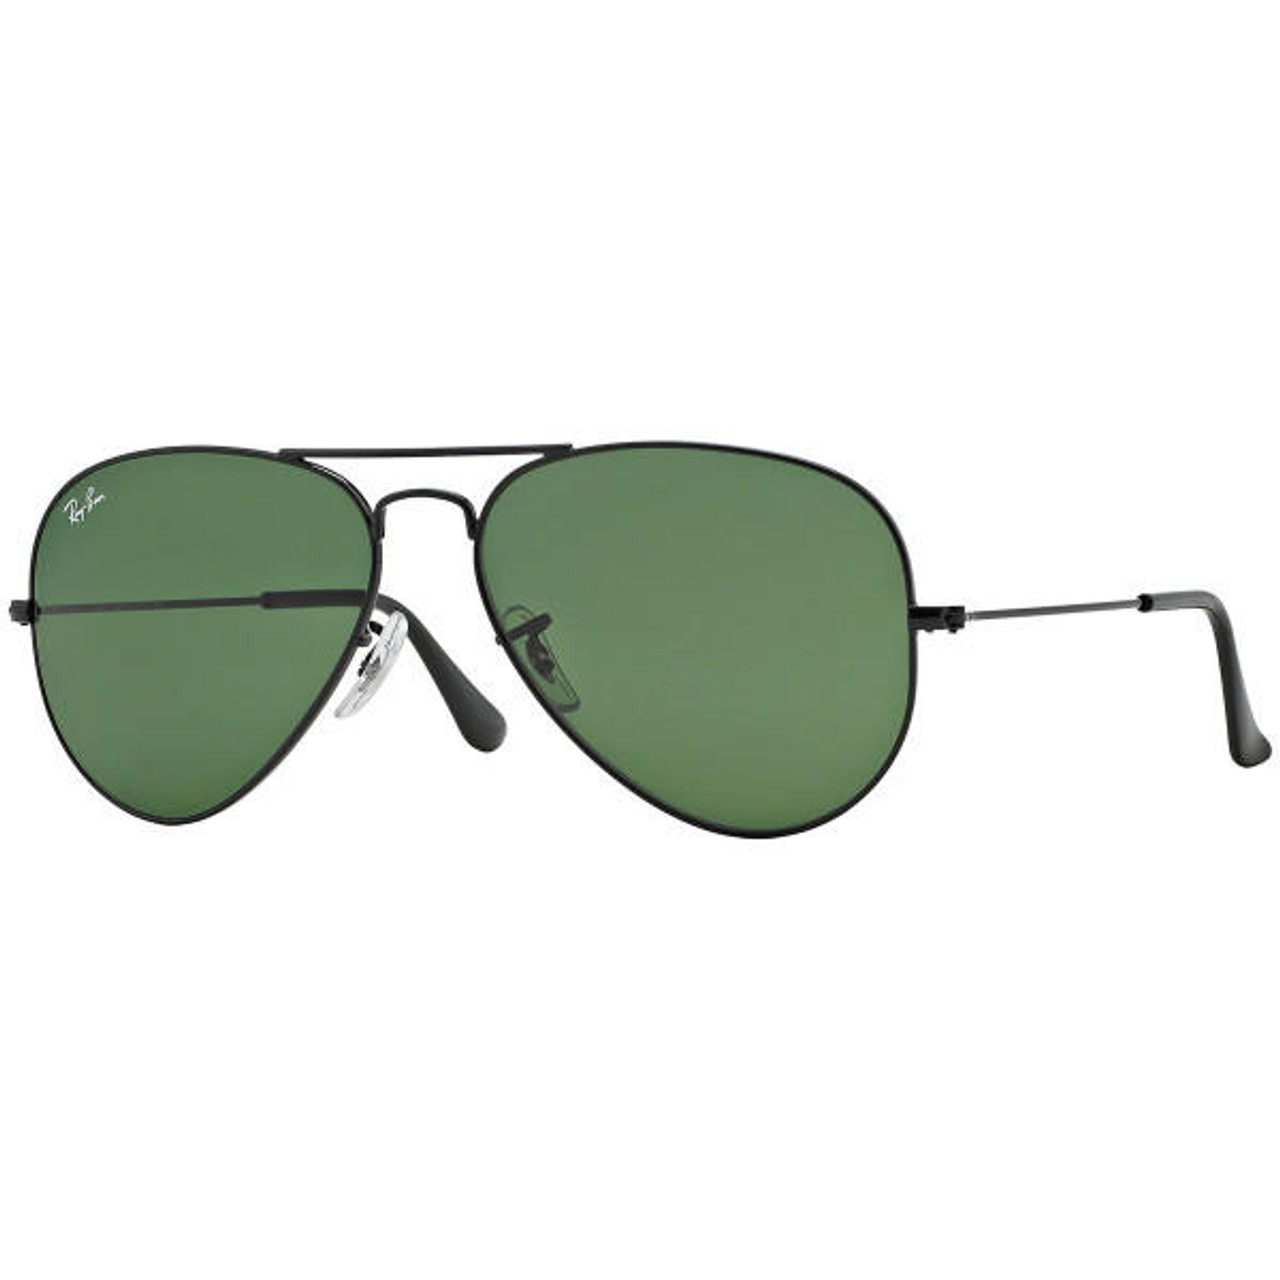 Ray-Ban RB3025 Aviator Classic Sunglasses - Parallel Imported